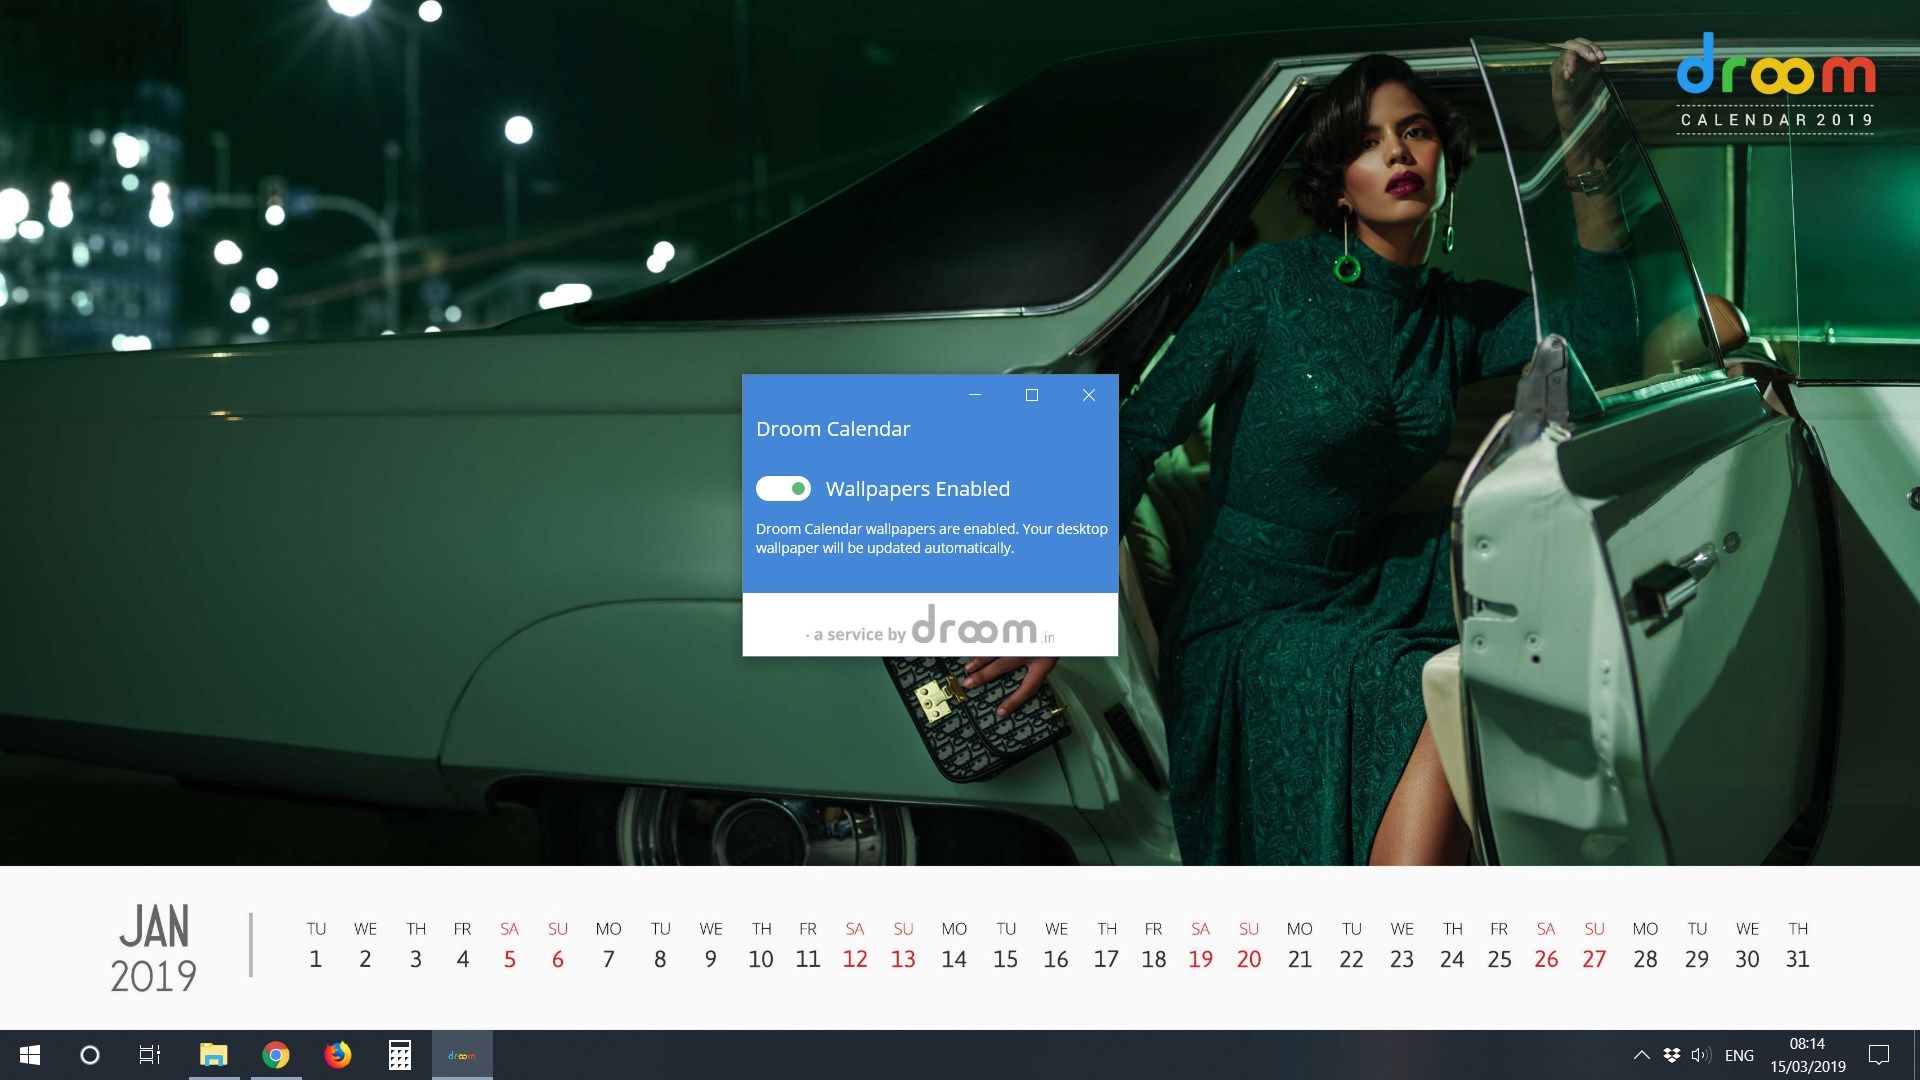 Enable Droom Calendar to allow your desktop wallpaper to be automatically updated when you login on Windows.